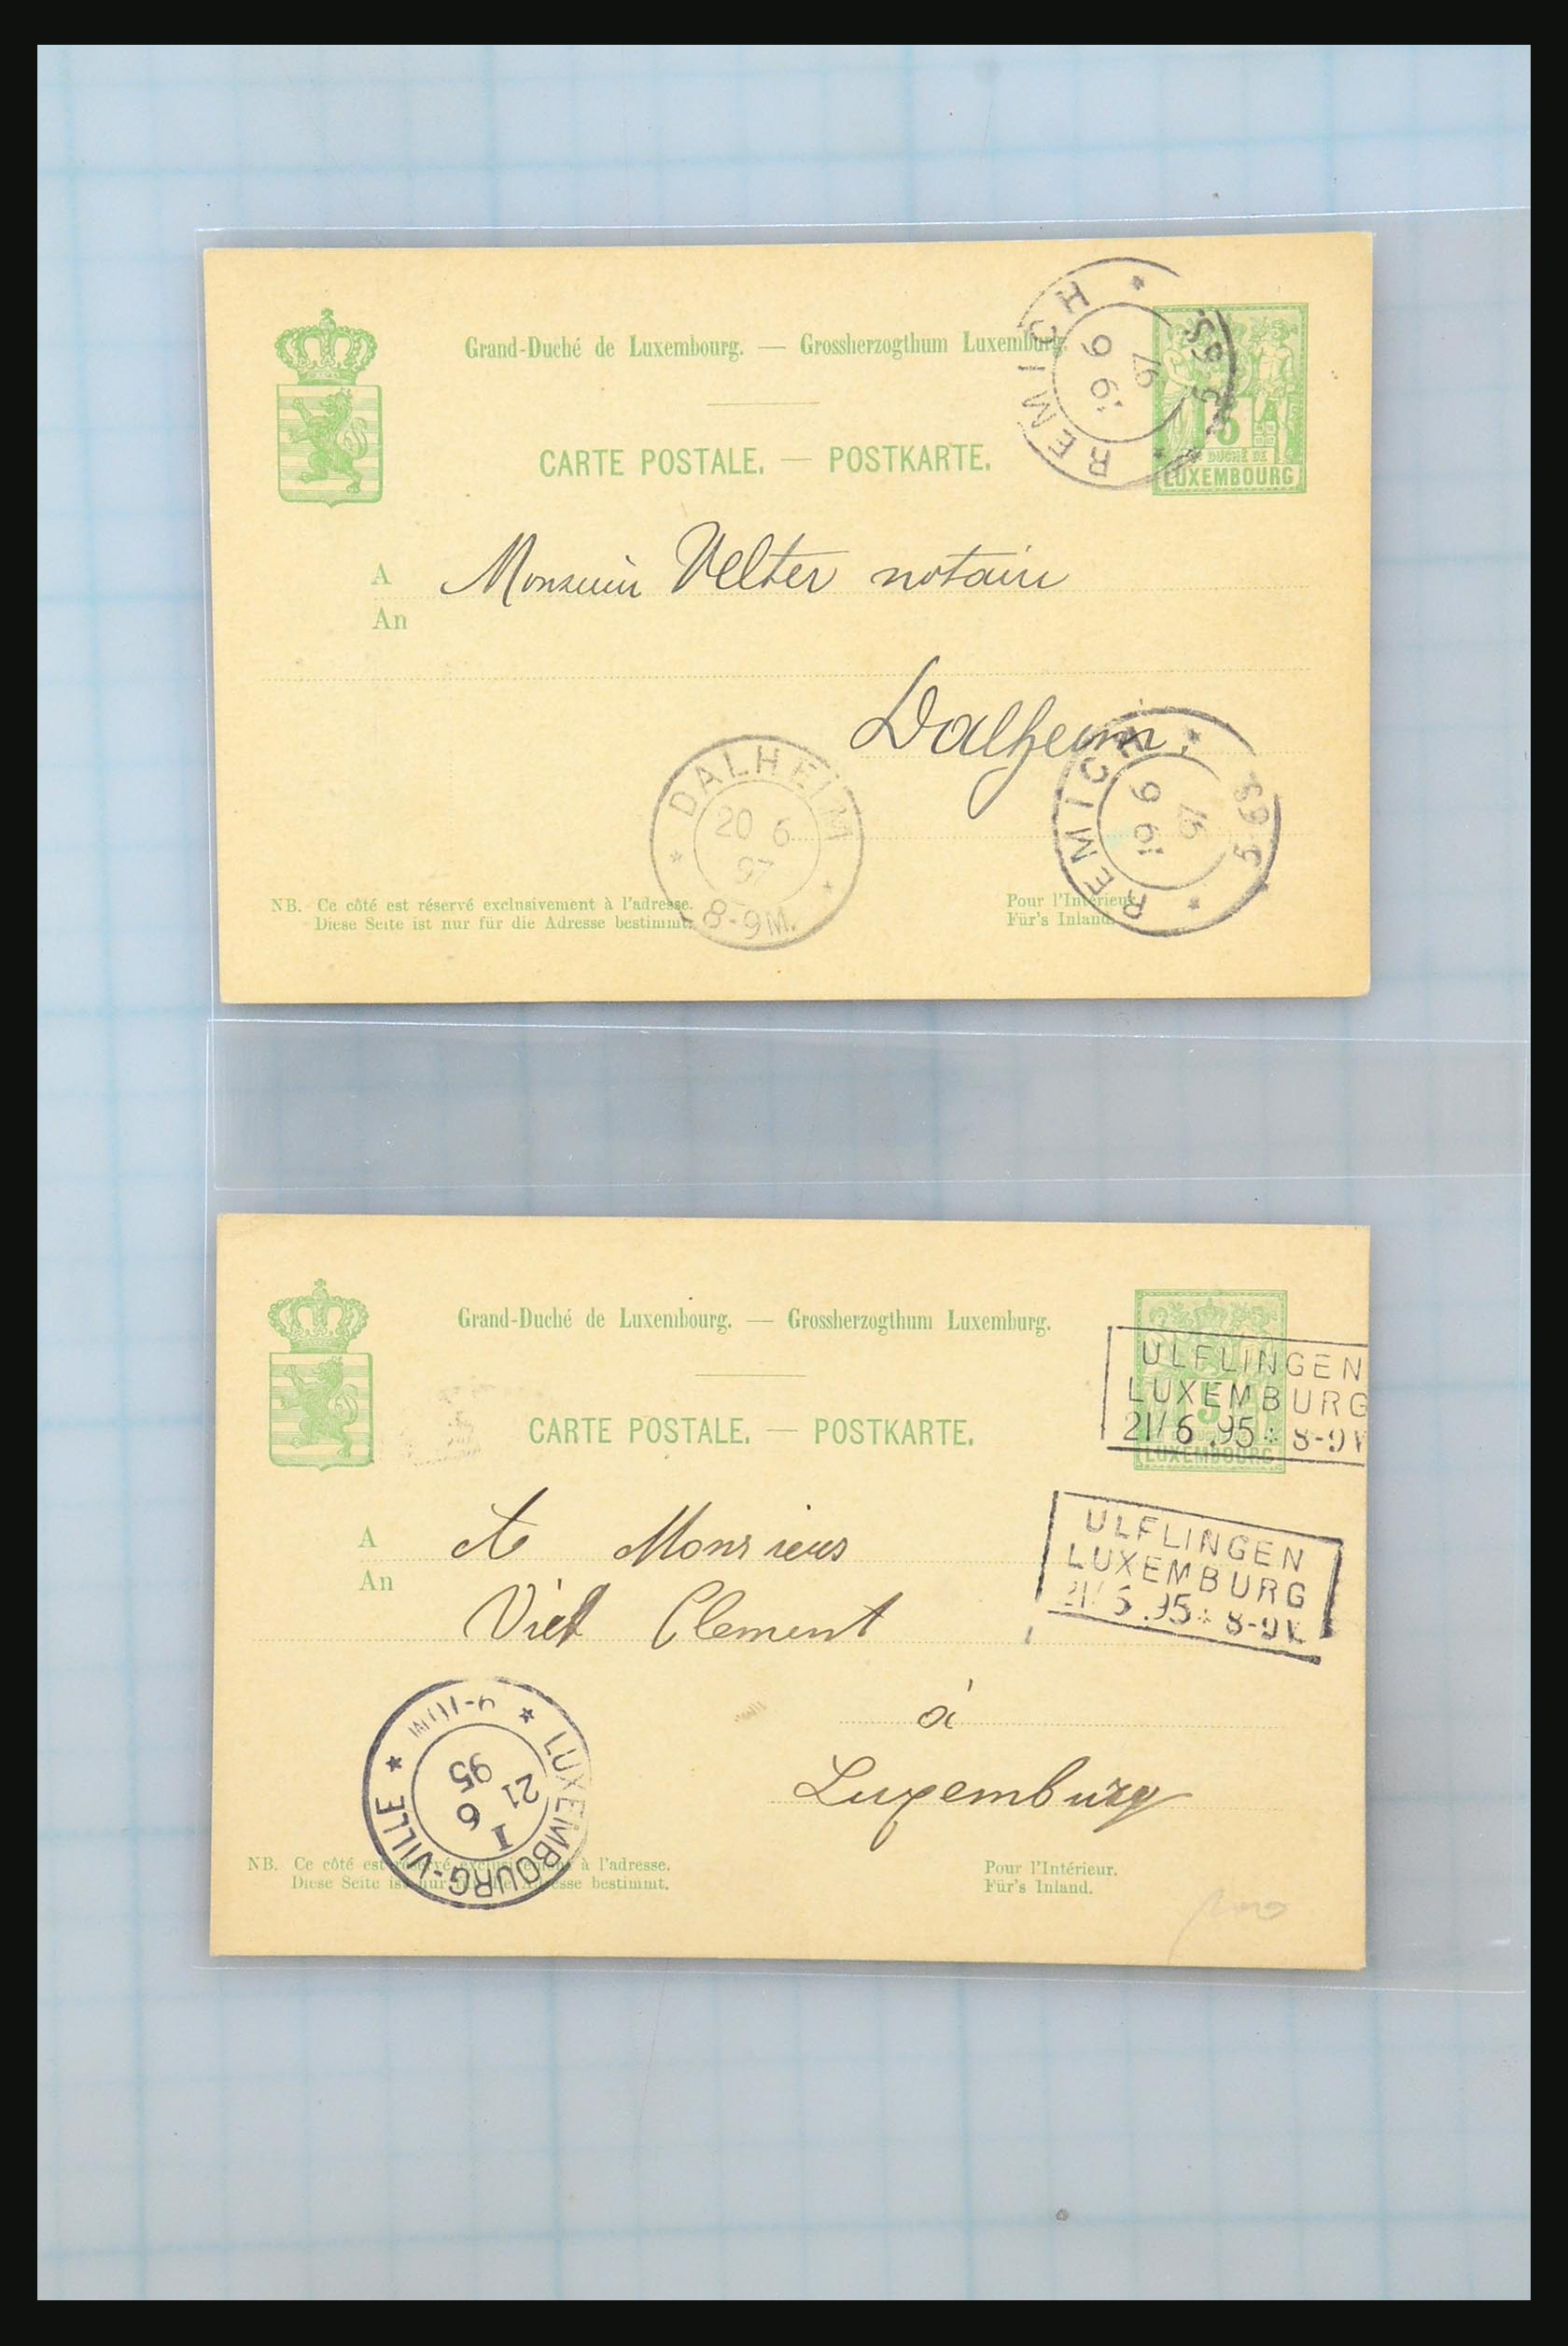 31358 058 - 31358 Portugal/Luxemburg/Greece covers 1880-1960.